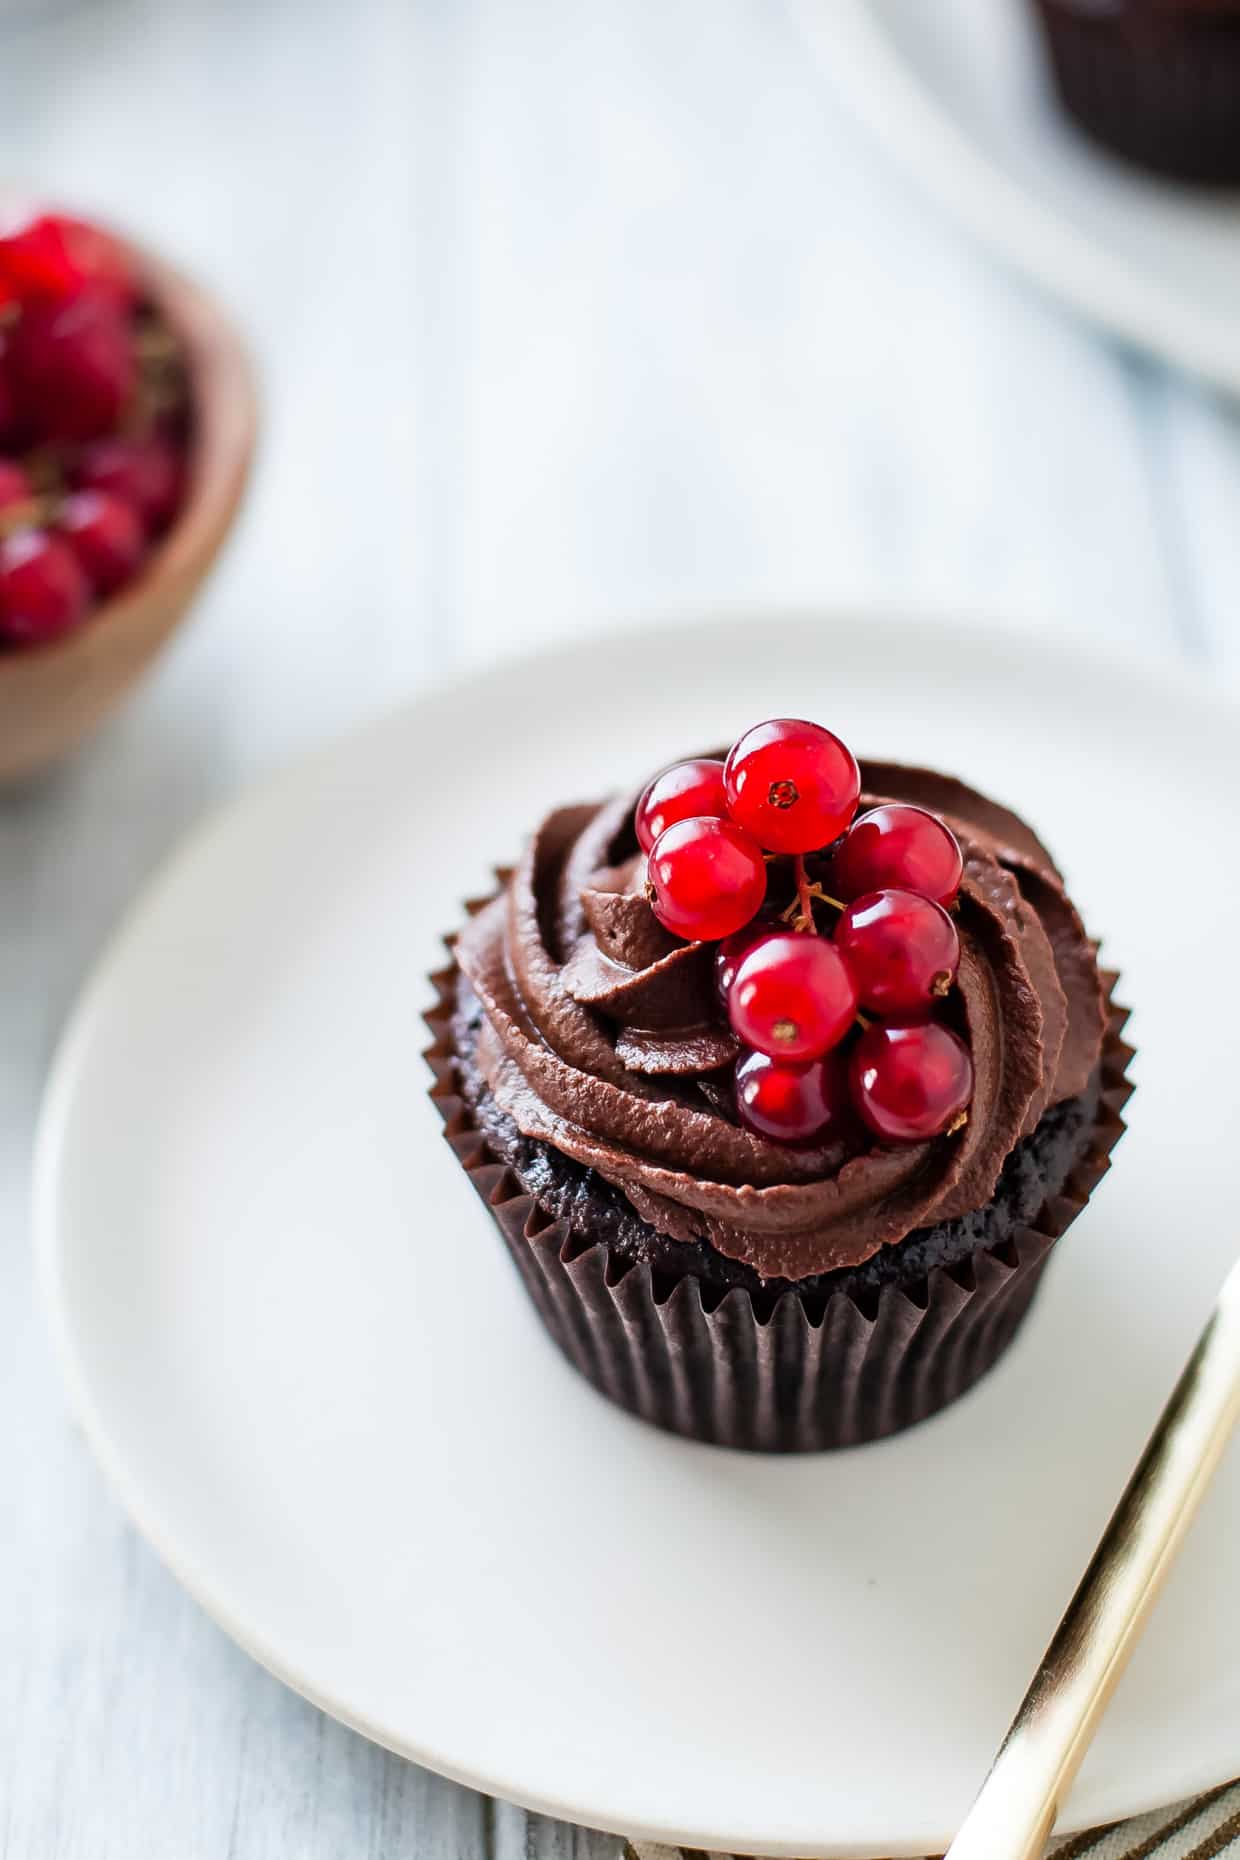 Gluten-Free Double Chocolate Cupcakes with Currant Filling